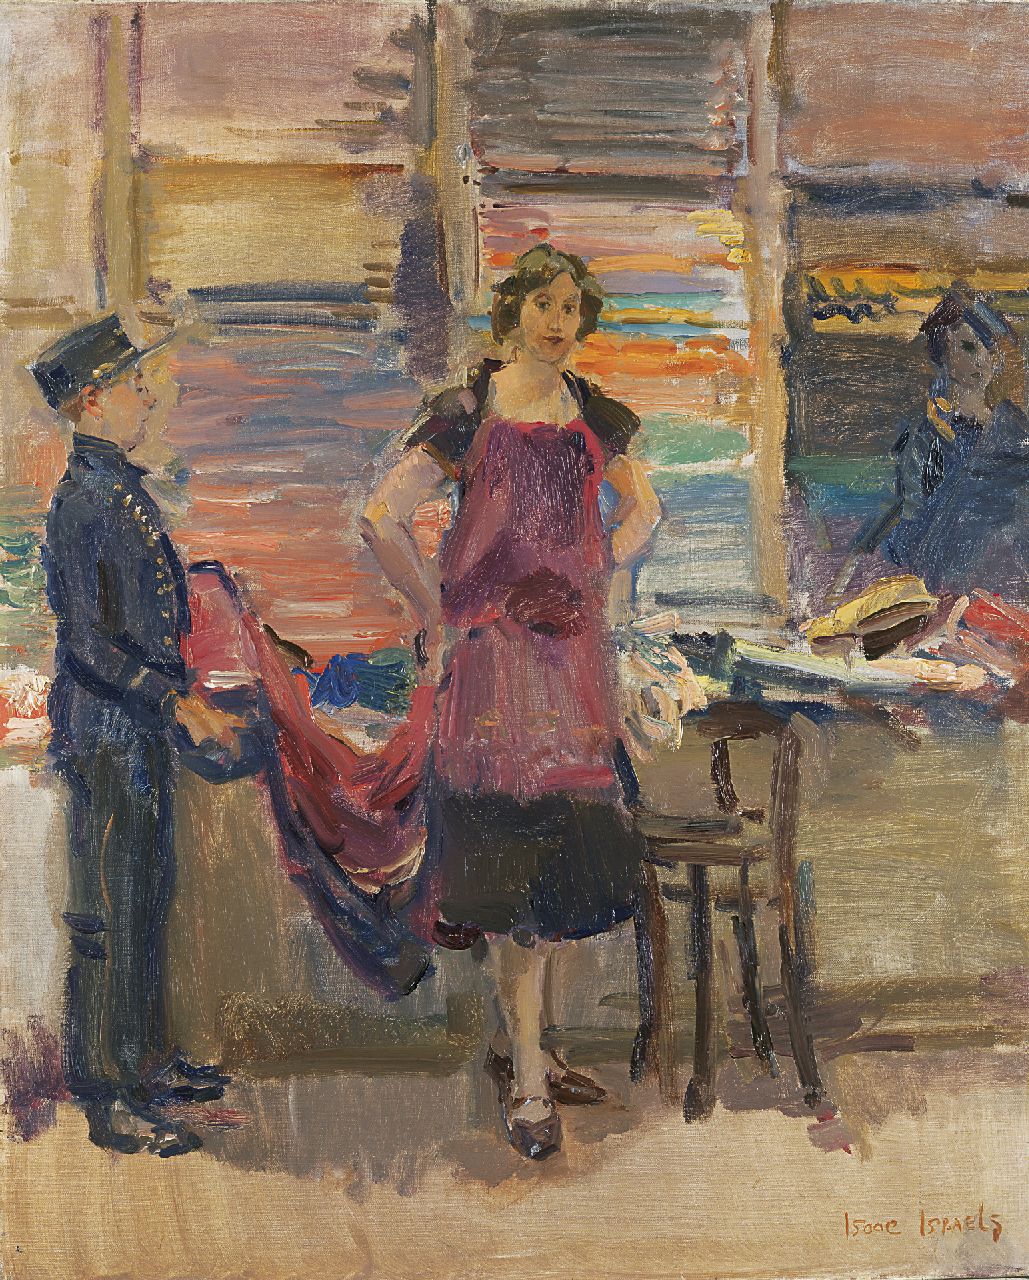 Israels I.L.  | 'Isaac' Lazarus Israels, Trying on fabrics in Maison Wijnman, The Hague, Öl auf Leinwand 80,0 x 65,5 cm, signed l.r. und painted between 1925-1926